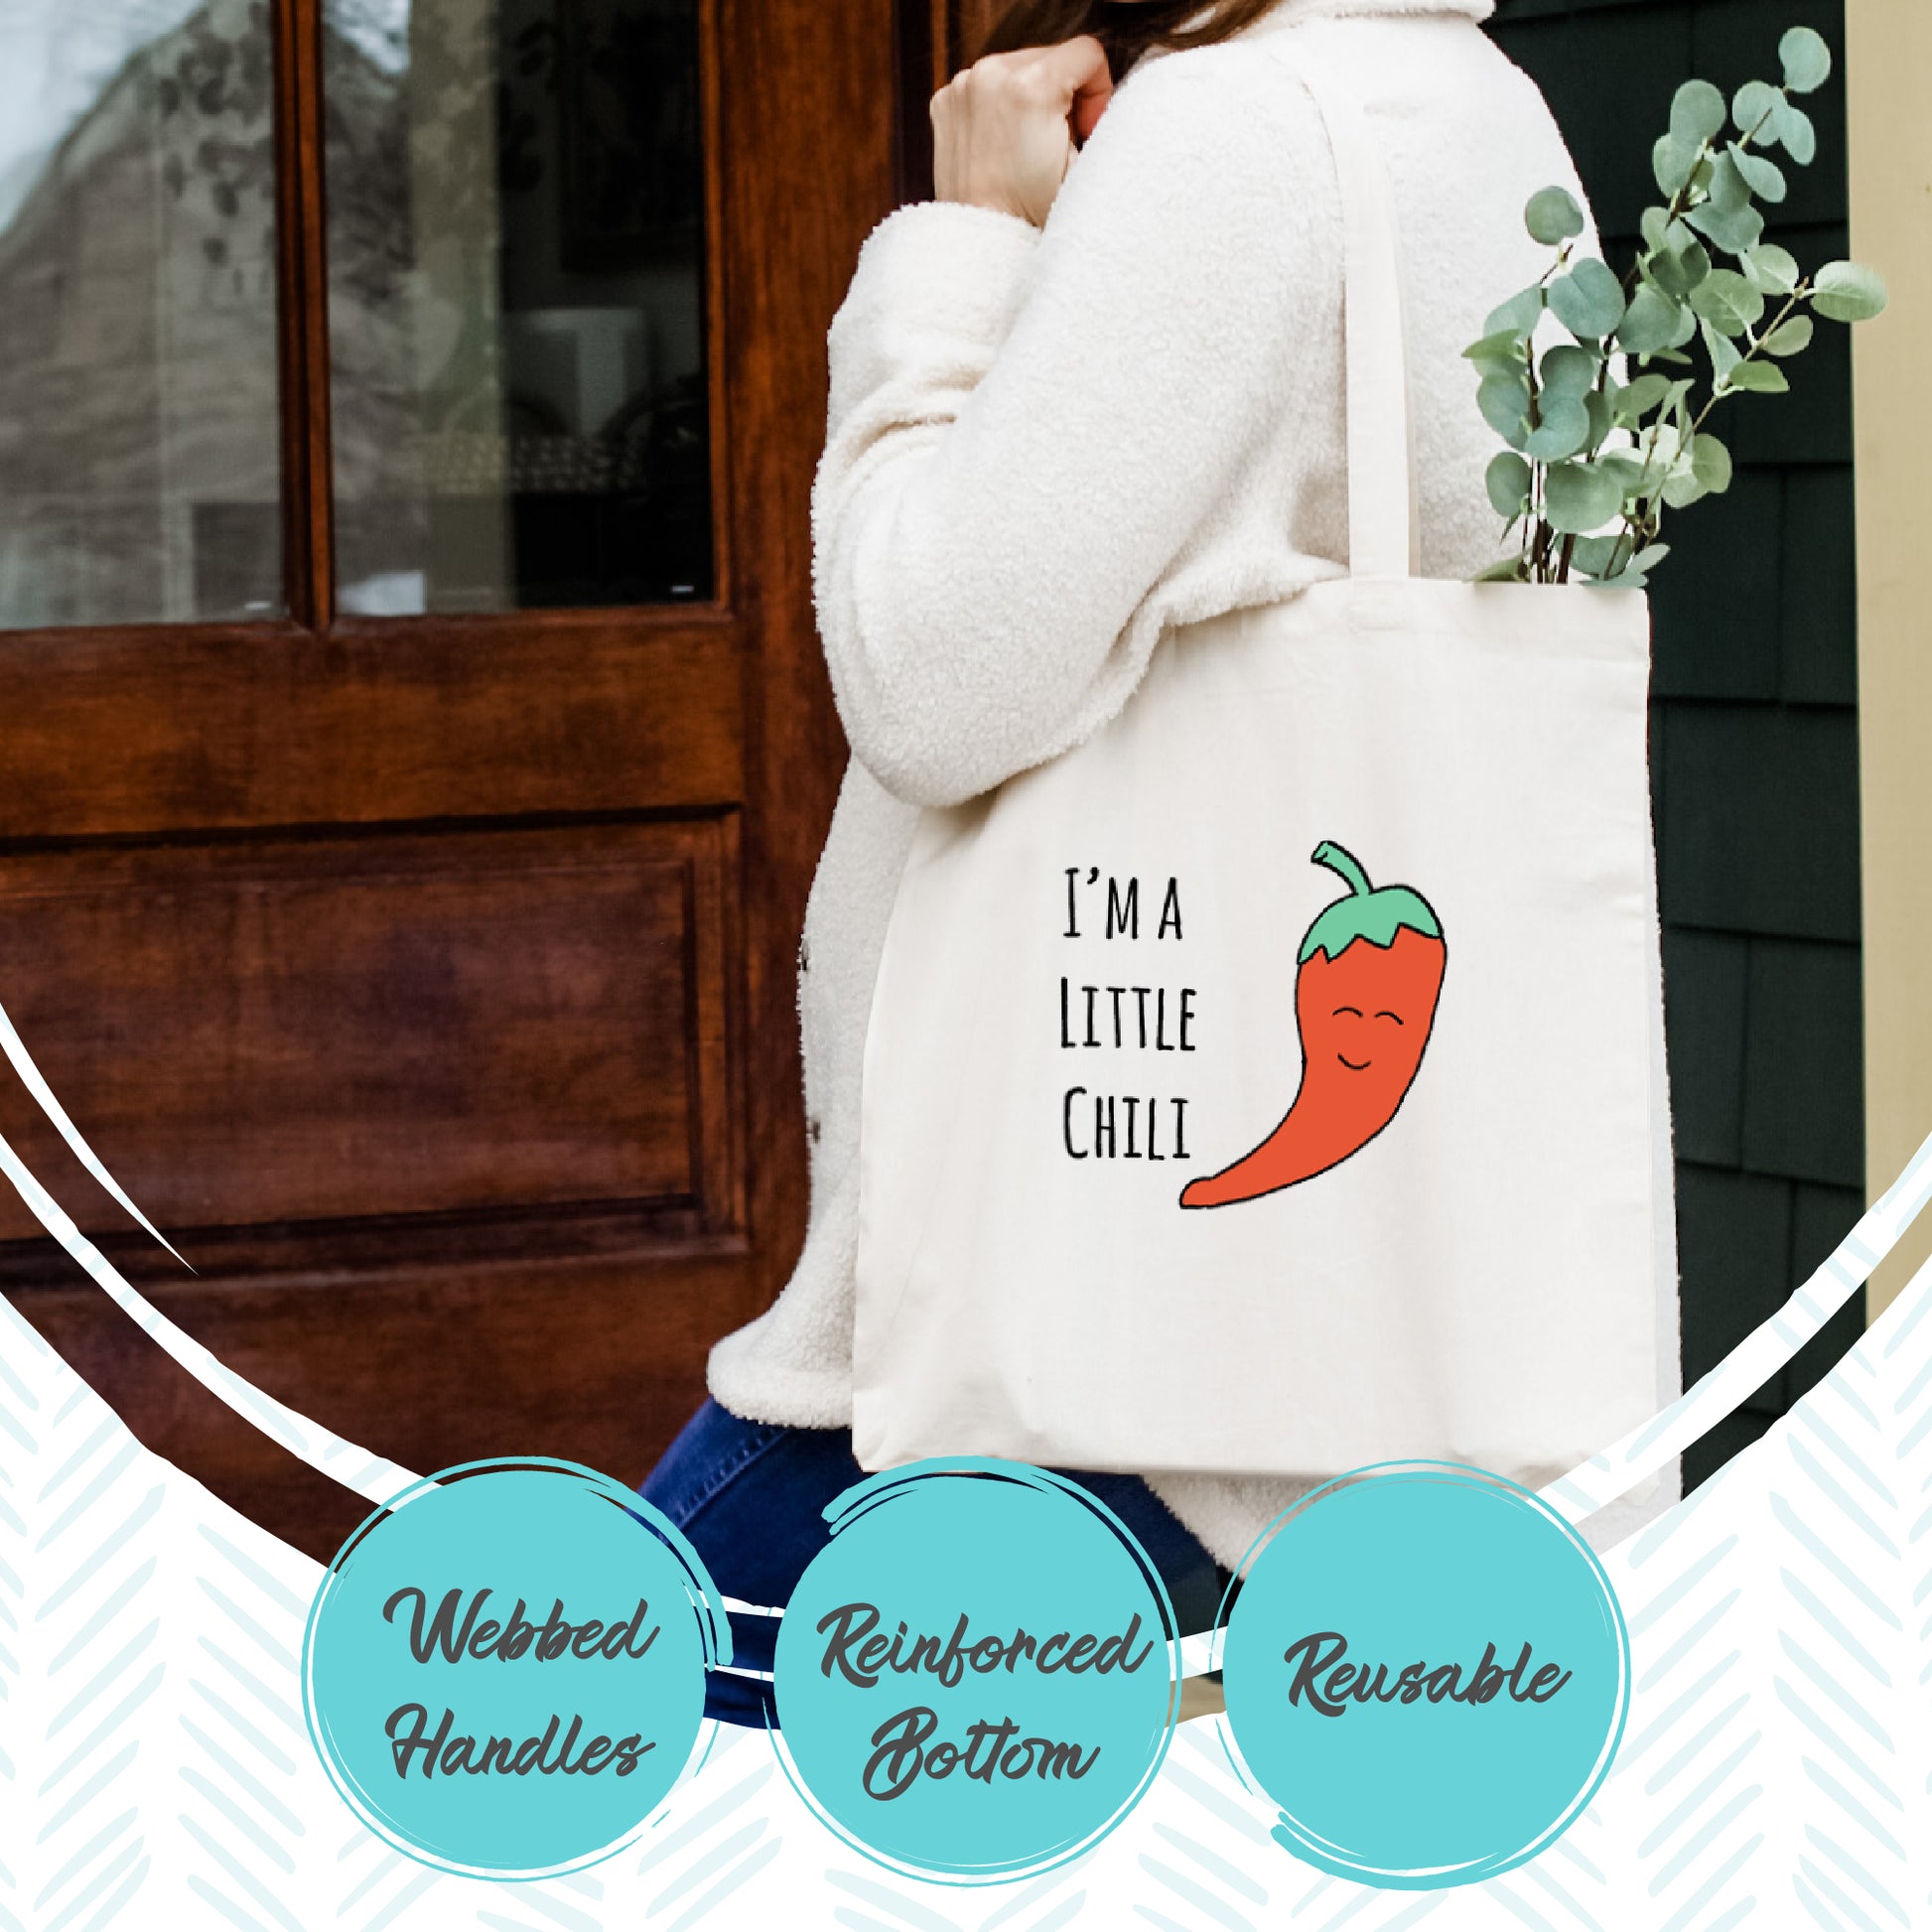 Stay Weird - Full Color Tote - MoonlightMakers